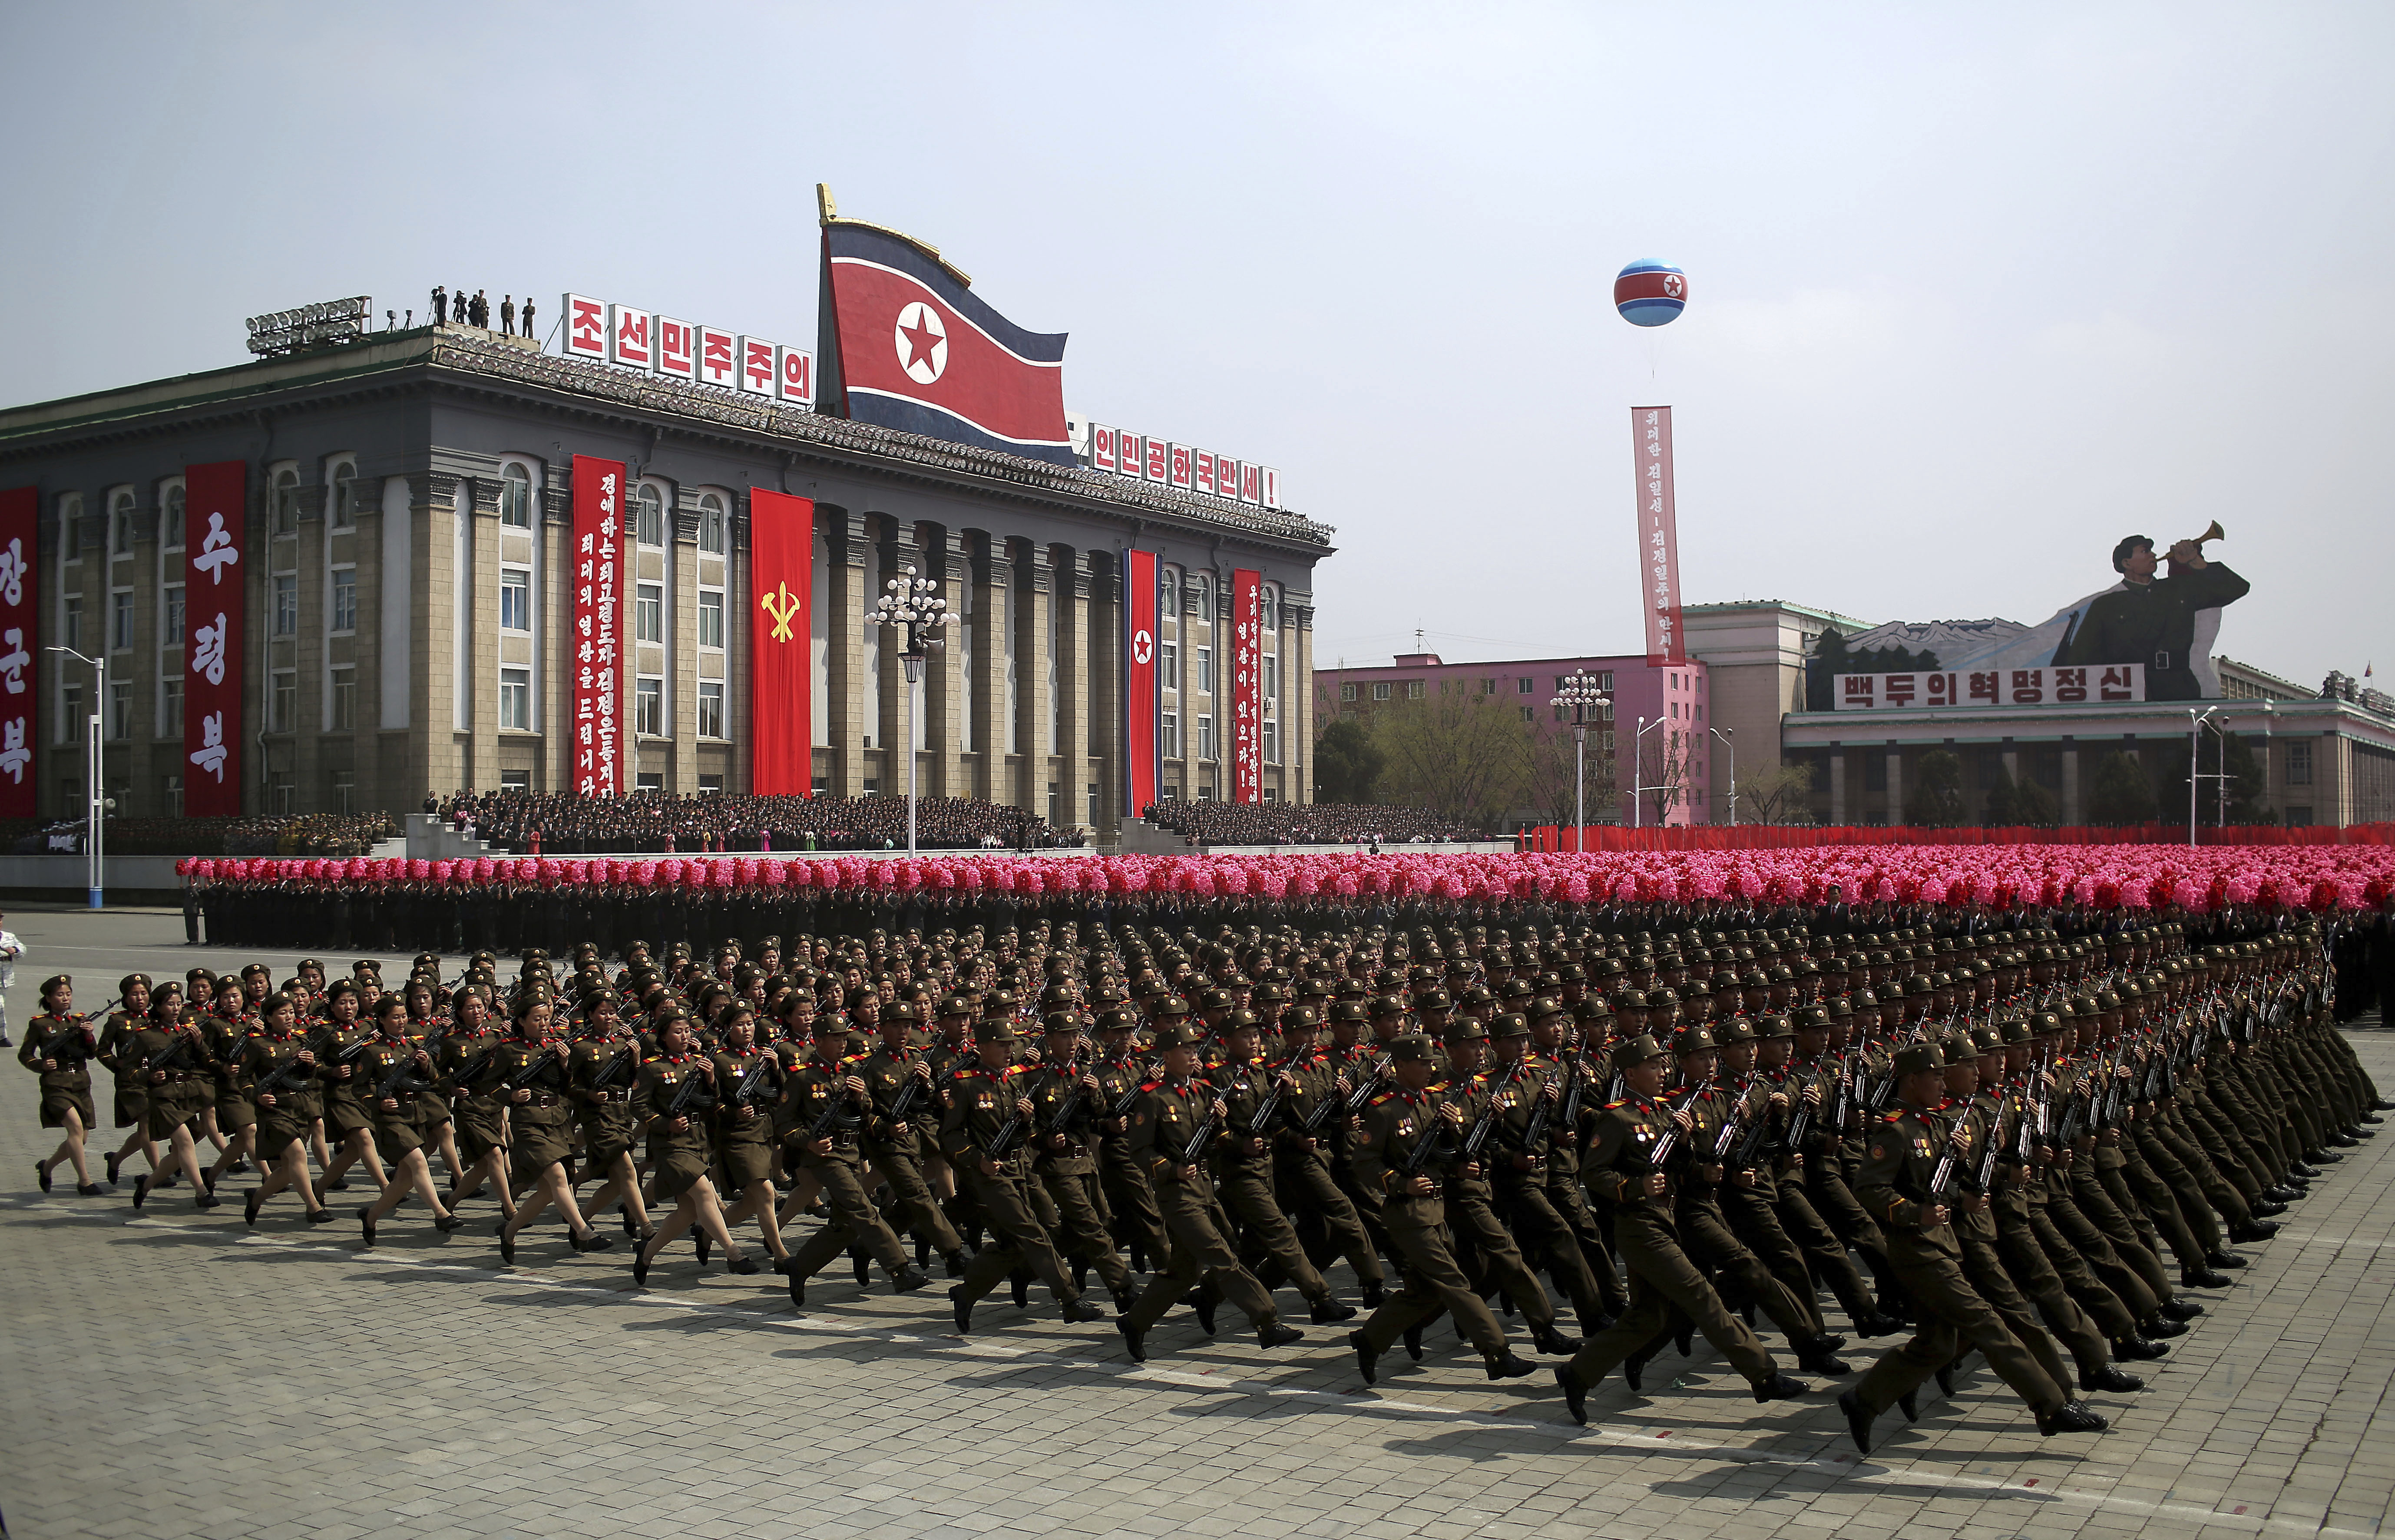 In this Saturday, April 15, 2017, file photo, a soldiers march across Kim Il Sung Square during a military parade in Pyongyang, North Korea to celebrate the 105th birth anniversary of Kim Il Sung, the country's late founder and grandfather of current ruler Kim Jong Un. North Korea's big day, the anniversary of the birth of its founding leader, Kim Il Sung, came and went with no underground nuclear test by the North, and no pre-emptive strikes off the deck of the USS Carl Vinson aircraft carrier sent to waters off the Korean Peninsula by President Donald Trump. Just hours before Vice President Mike Pence began his visit to Seoul on Sunday, Pyongyang fired off a ballistic missile — but it appears to have exploded seconds after it got off the ground. (AP Photo/Wong Maye-E, File)